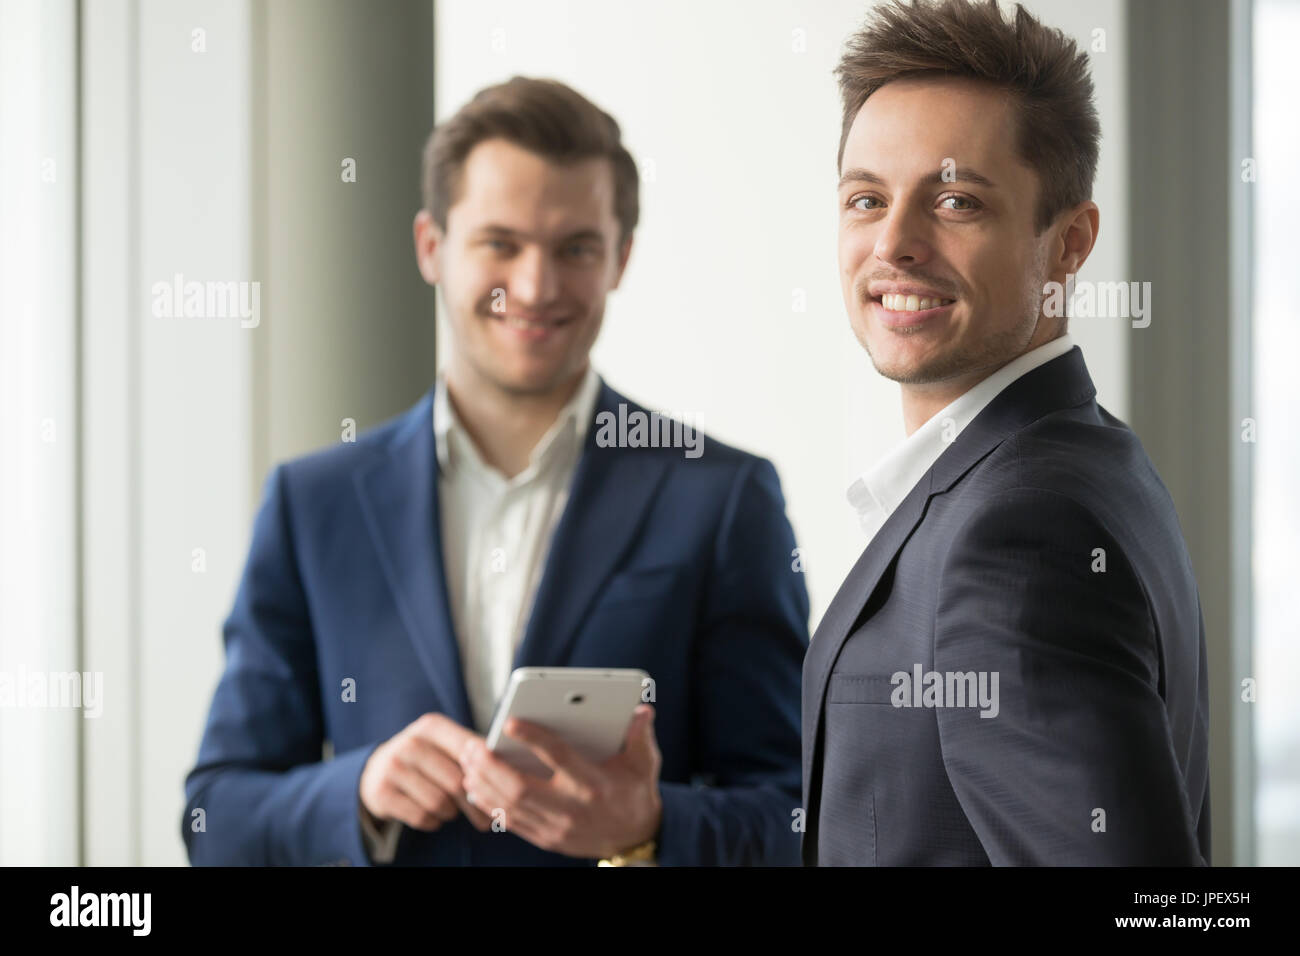 Smiling young businessman looking at camera, application develop Stock Photo